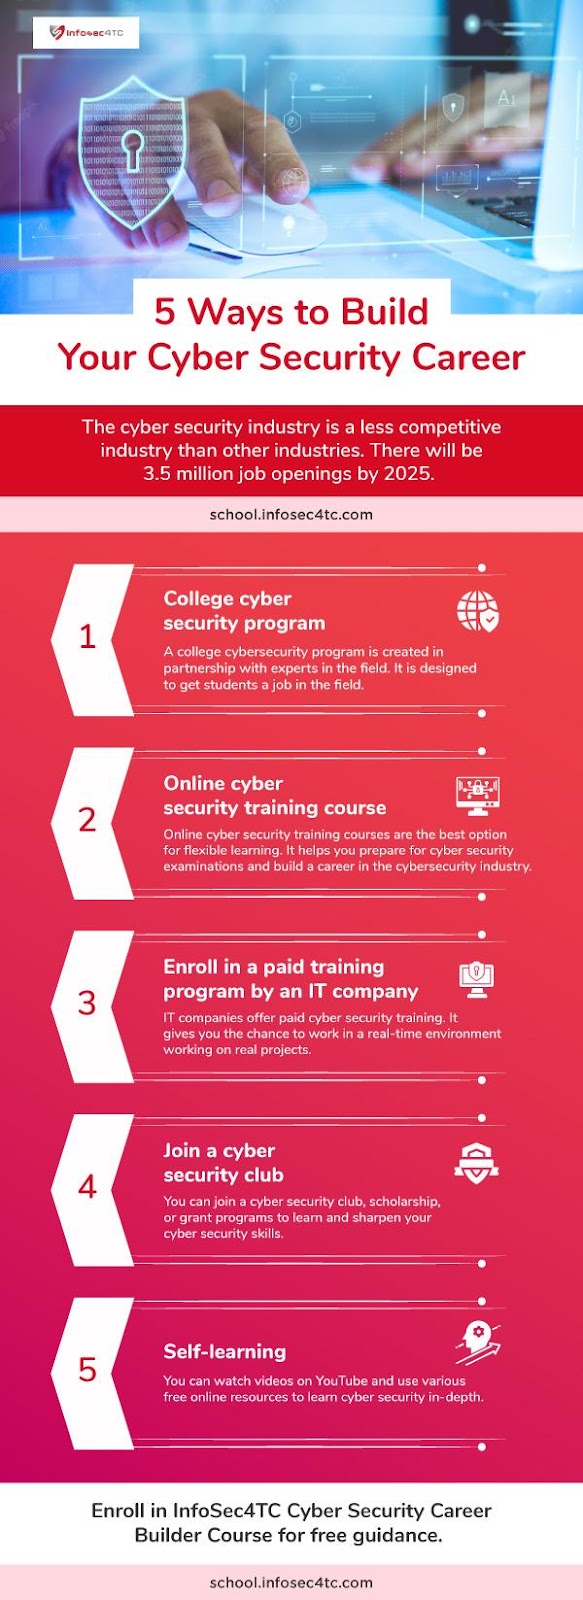 career in cyber security info-graphic